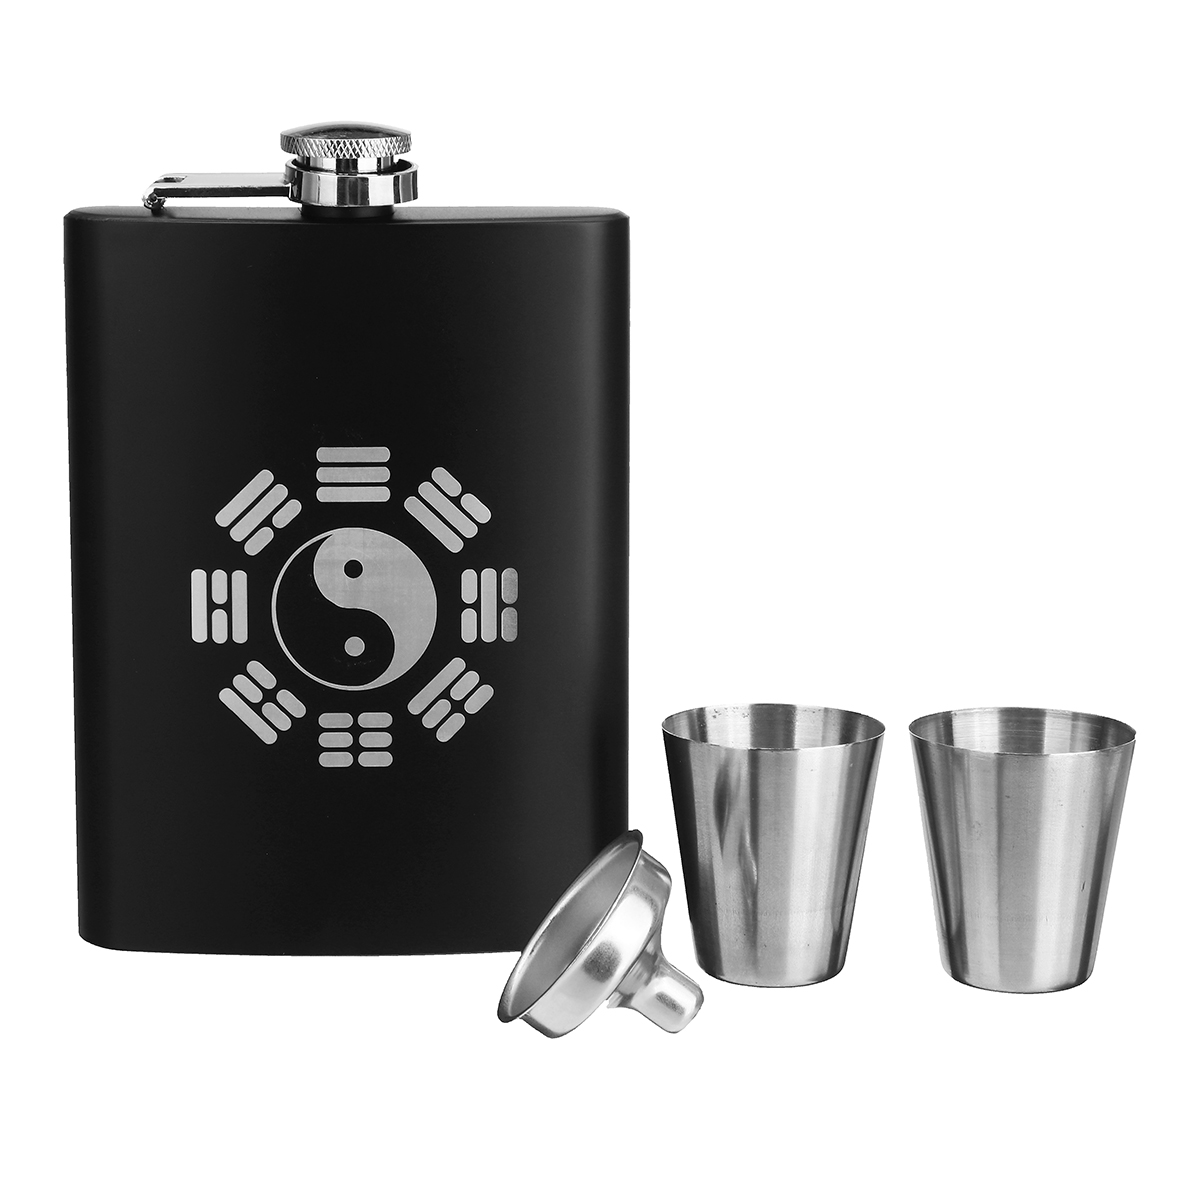 8oz-Stainless-Steel-Pocket-Liquor-Hip-Flask-Drink-Flagon-with-Funnel-1582092-4